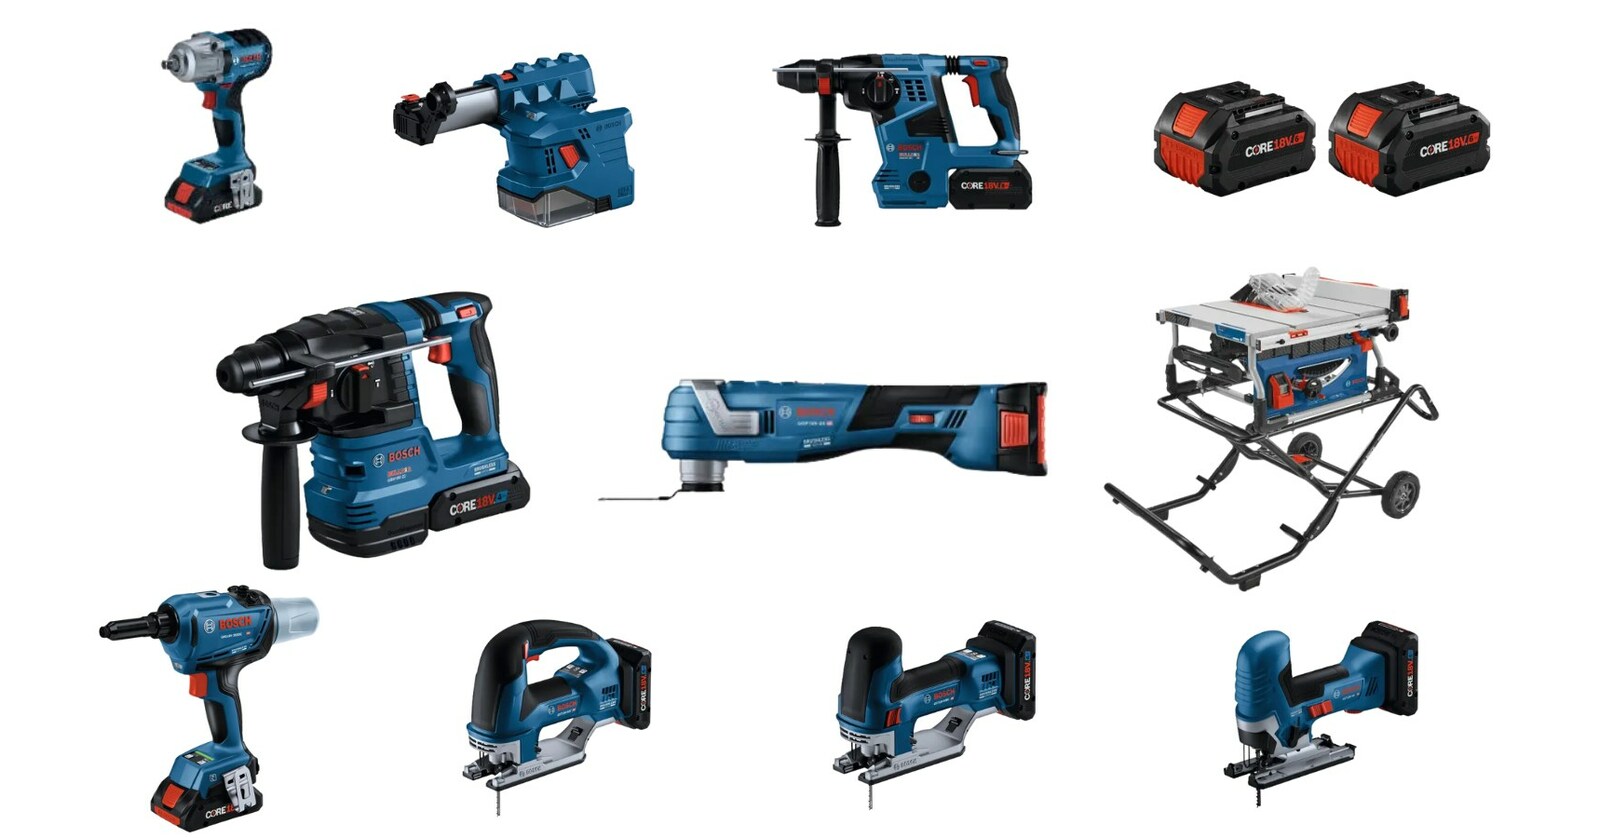 Bosch Power Tools Introduces 17 New Tools to the 18V Line